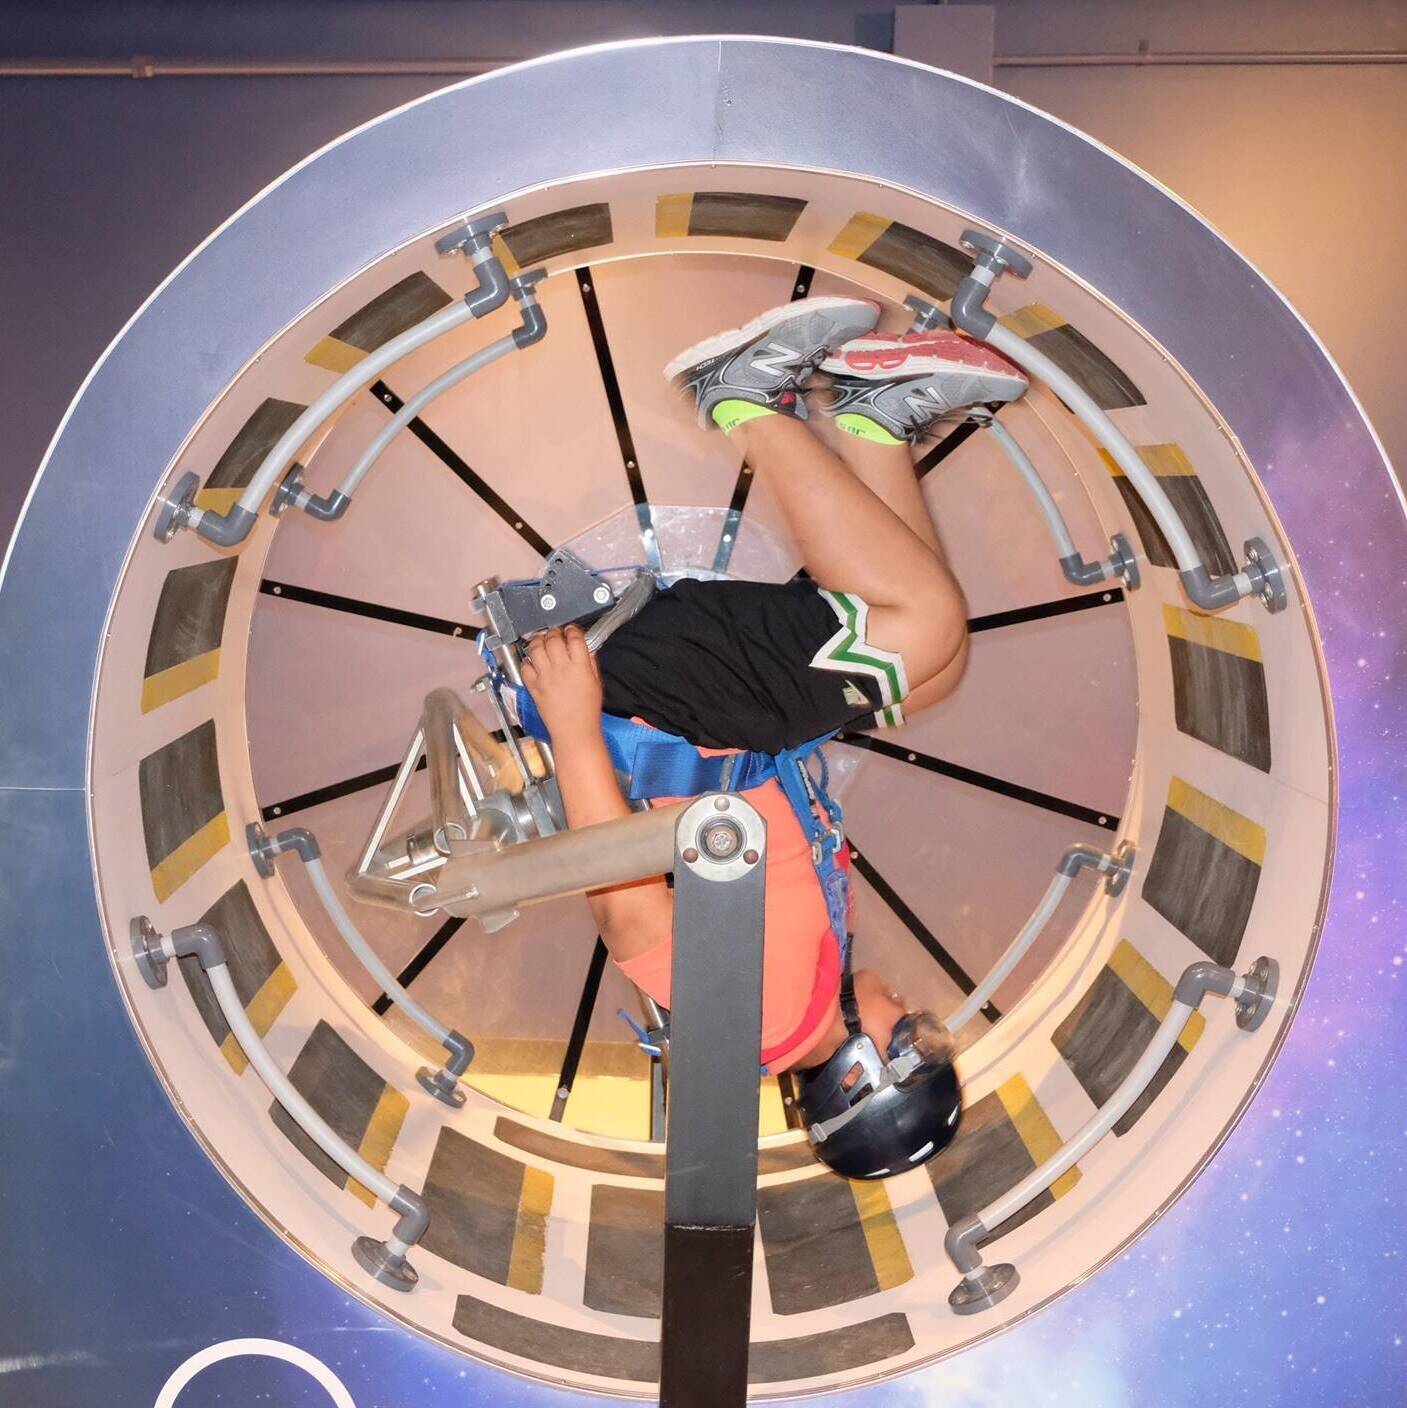 Student spinning upside down in a science center.